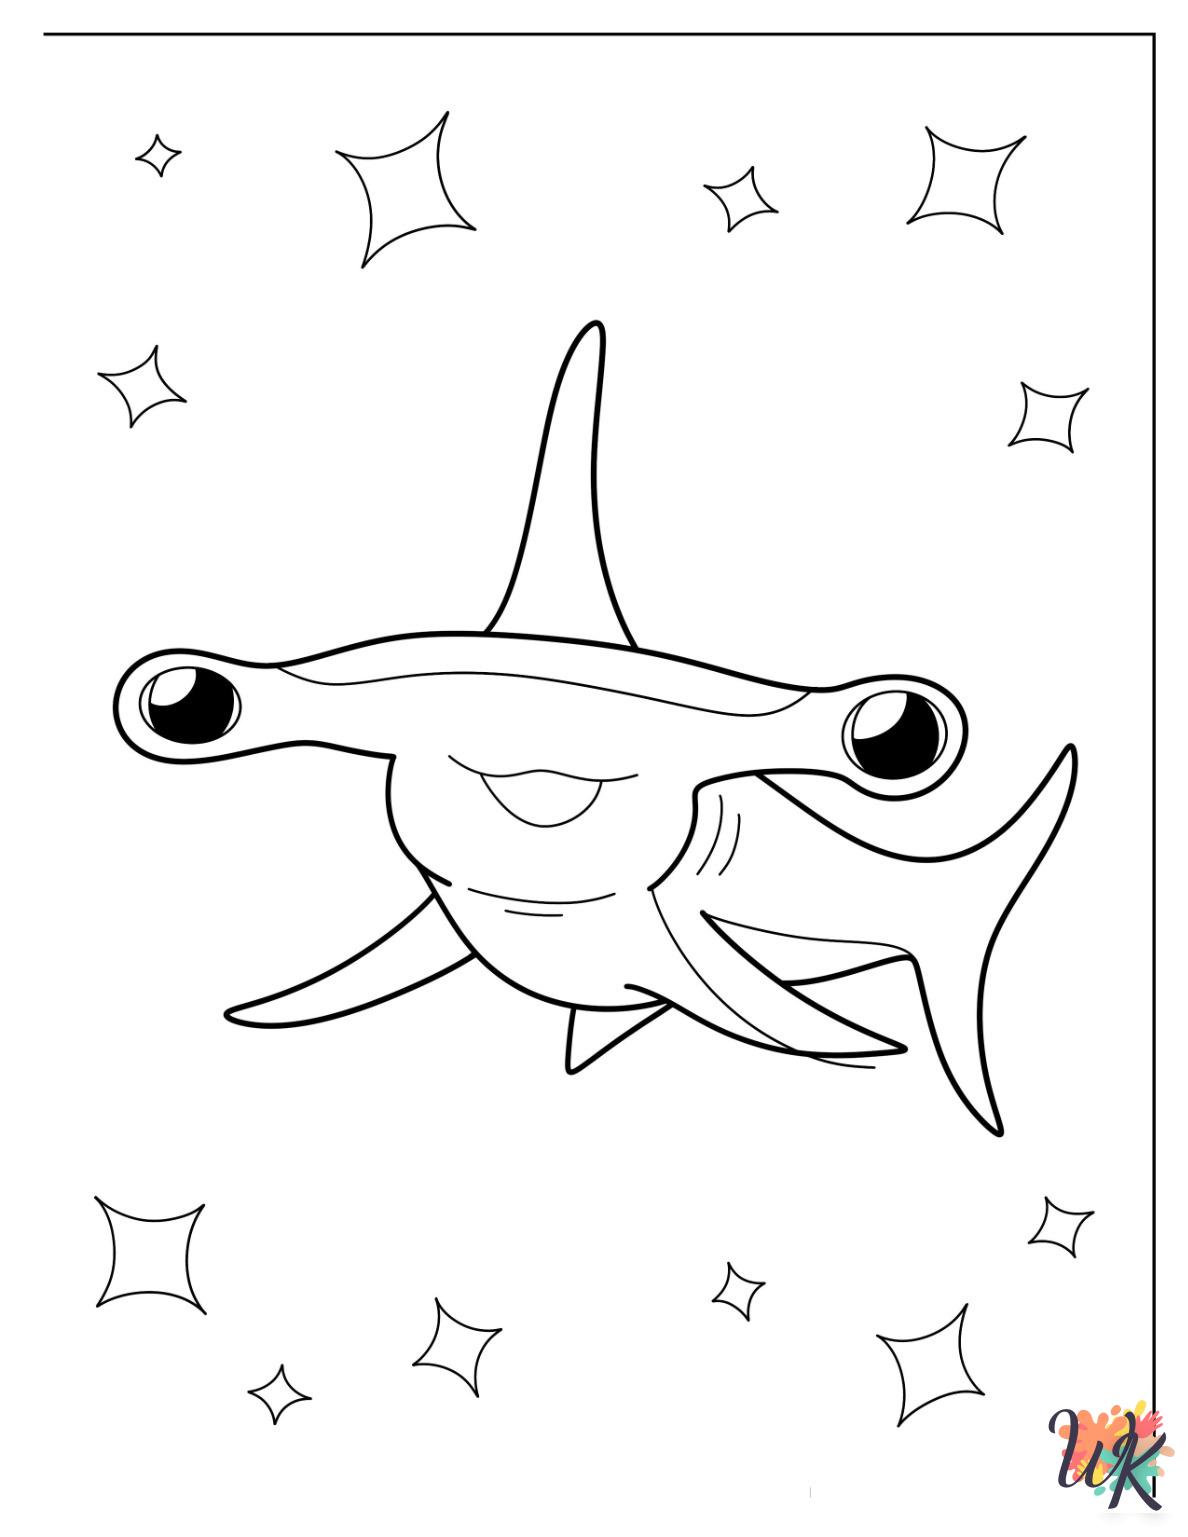 Hammerhead Shark coloring pages for preschoolers